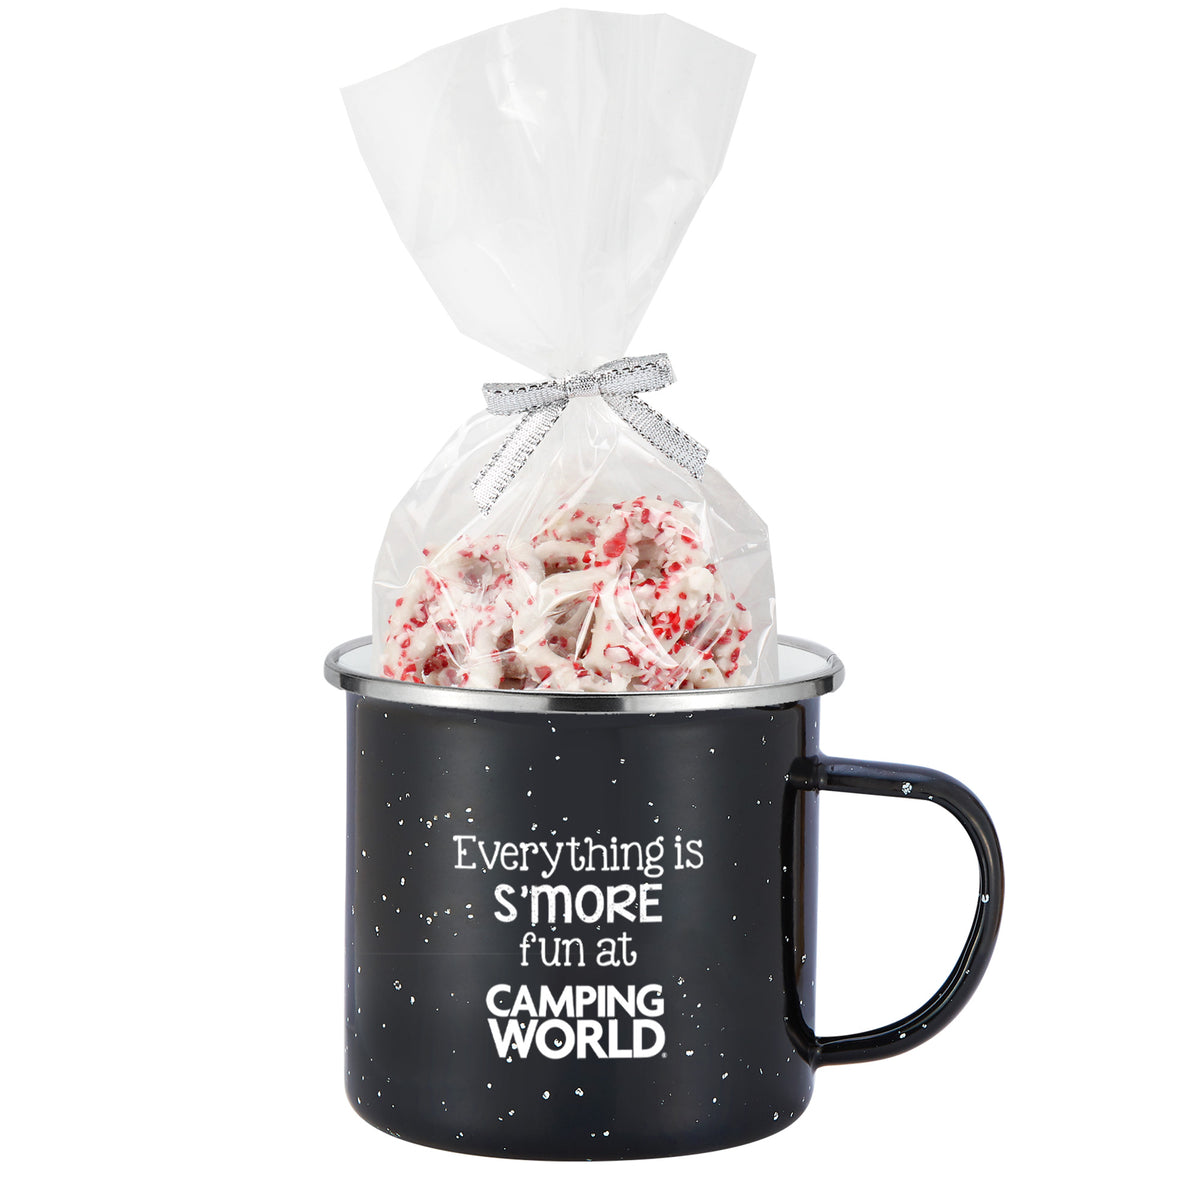 Speckled Camping Mug - 16 oz., White Chocolate Pretzels w/ Crushed Peppermint